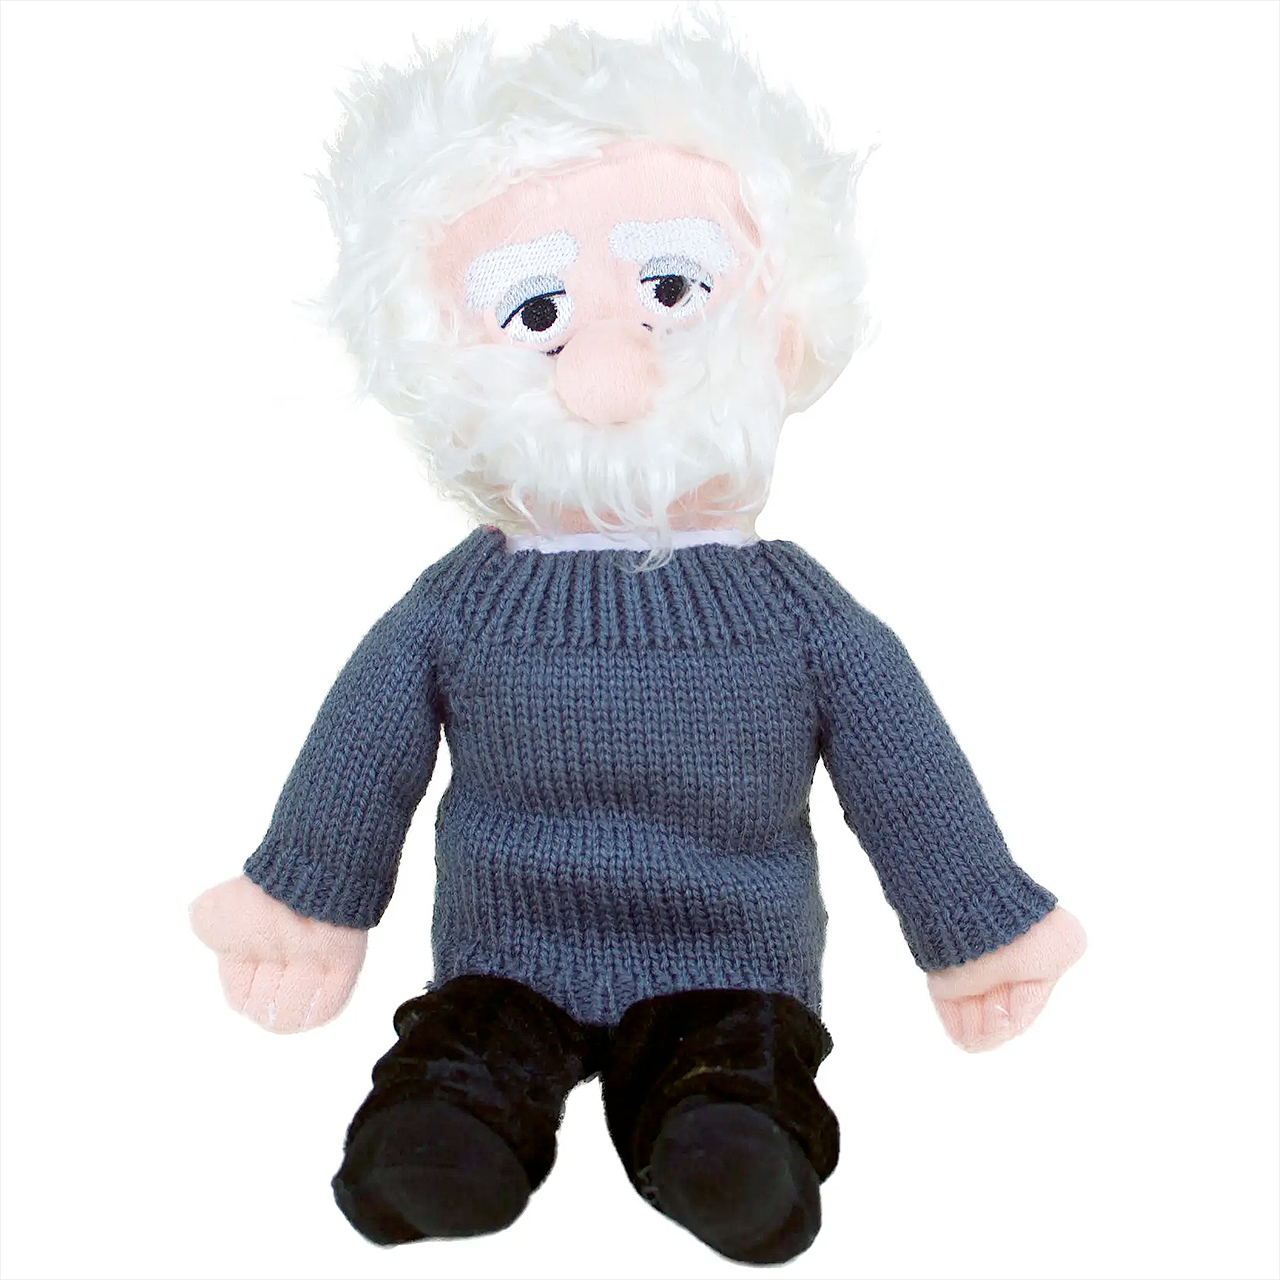 The Albert Einstein Little Thinker plush doll, from The Unemployed Philosophers Guild, was flown by the SpaceX Crew-5 astronauts as their zero-g indicator.